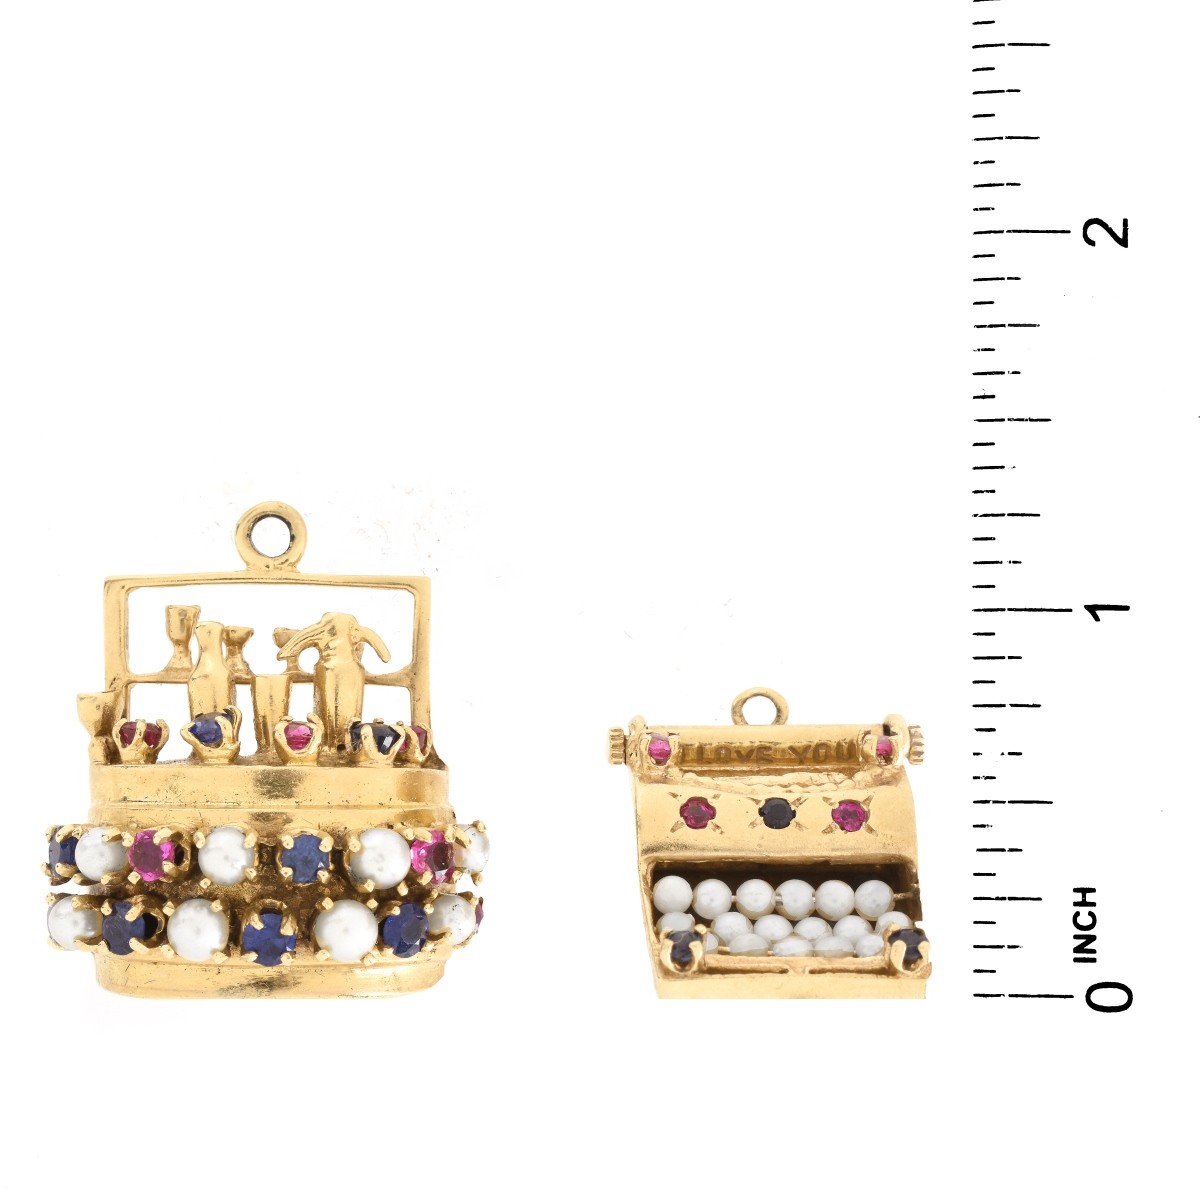 Two Vintage 14K and Gemstone Charms